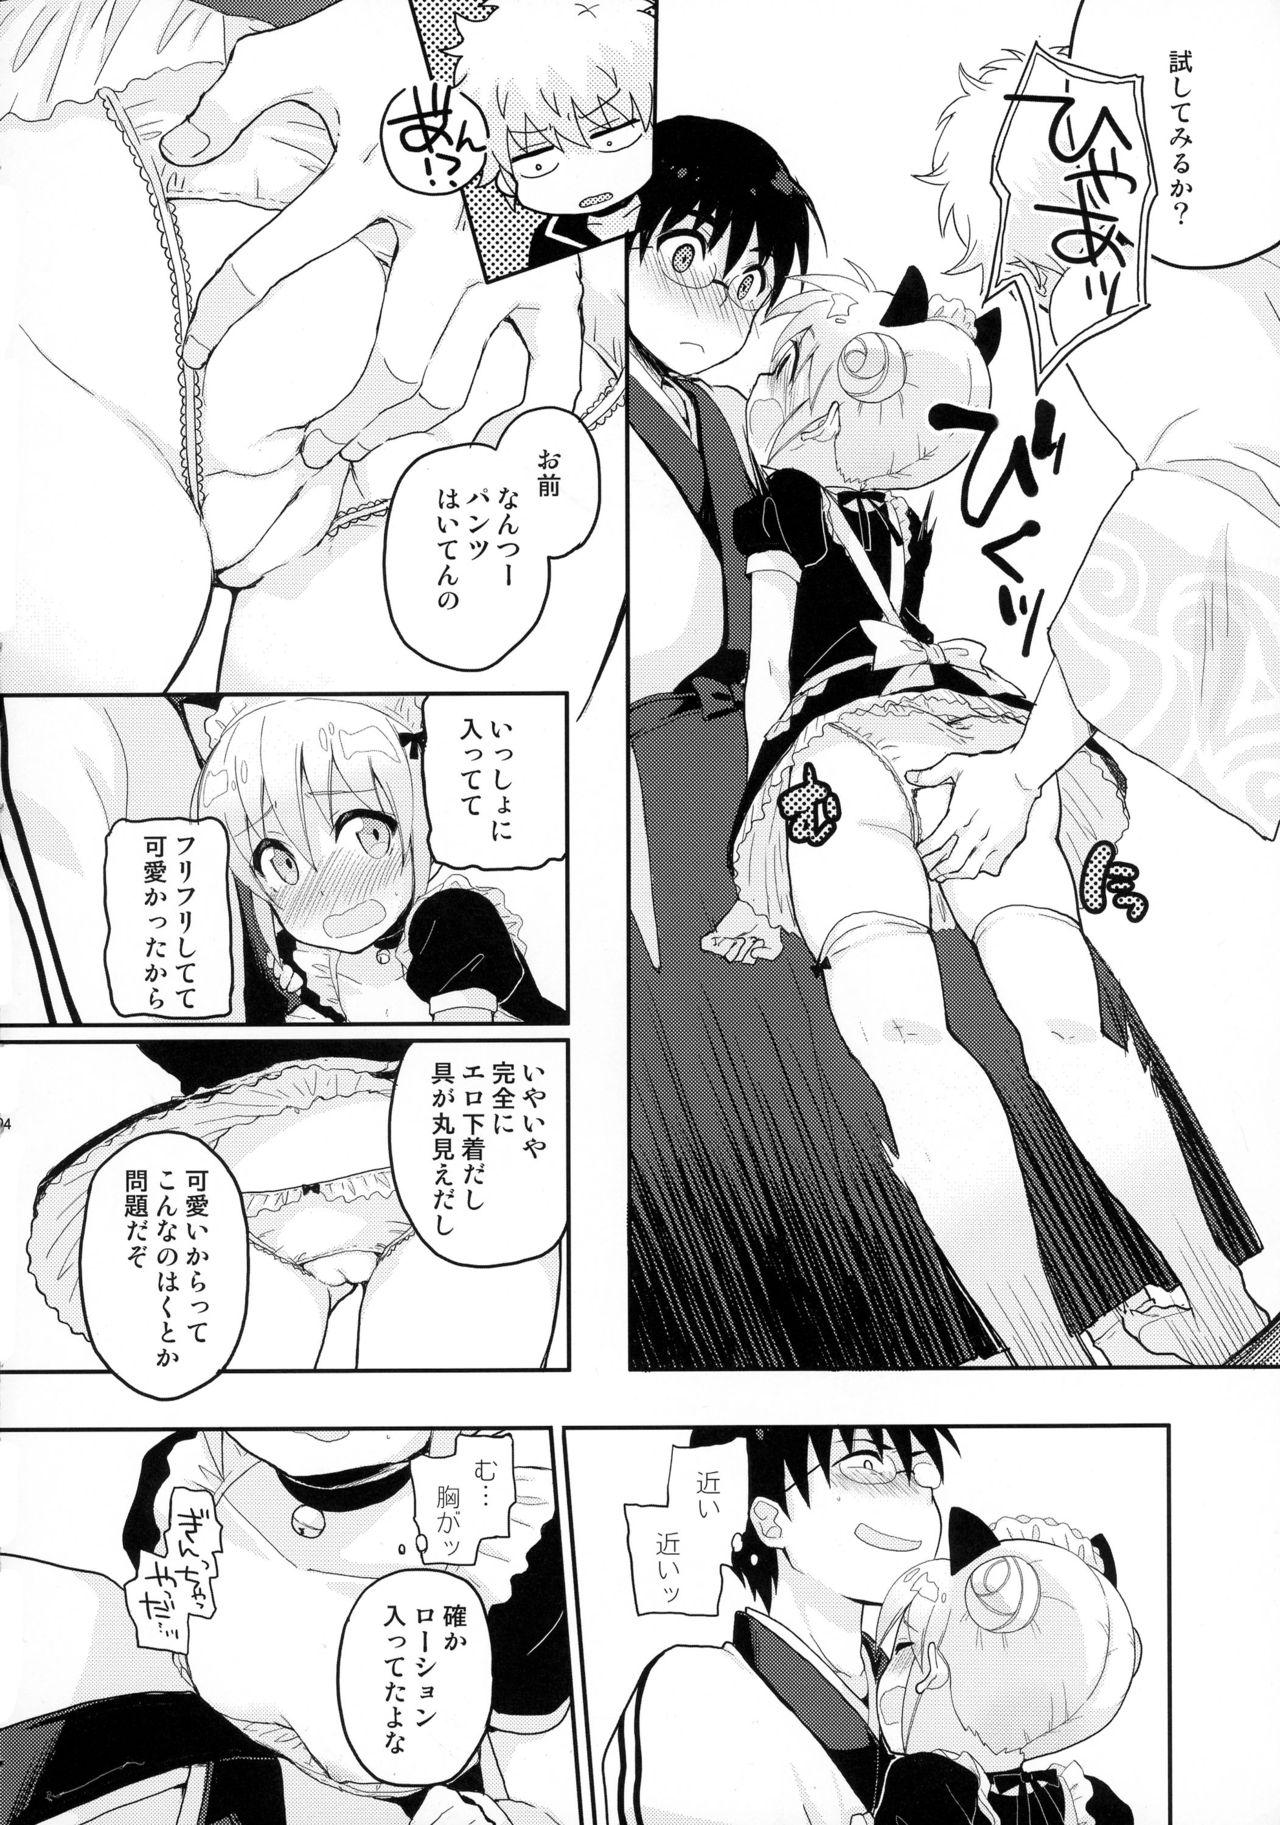 Pussylick SK - Gintama Free Rough Sex - Page 6